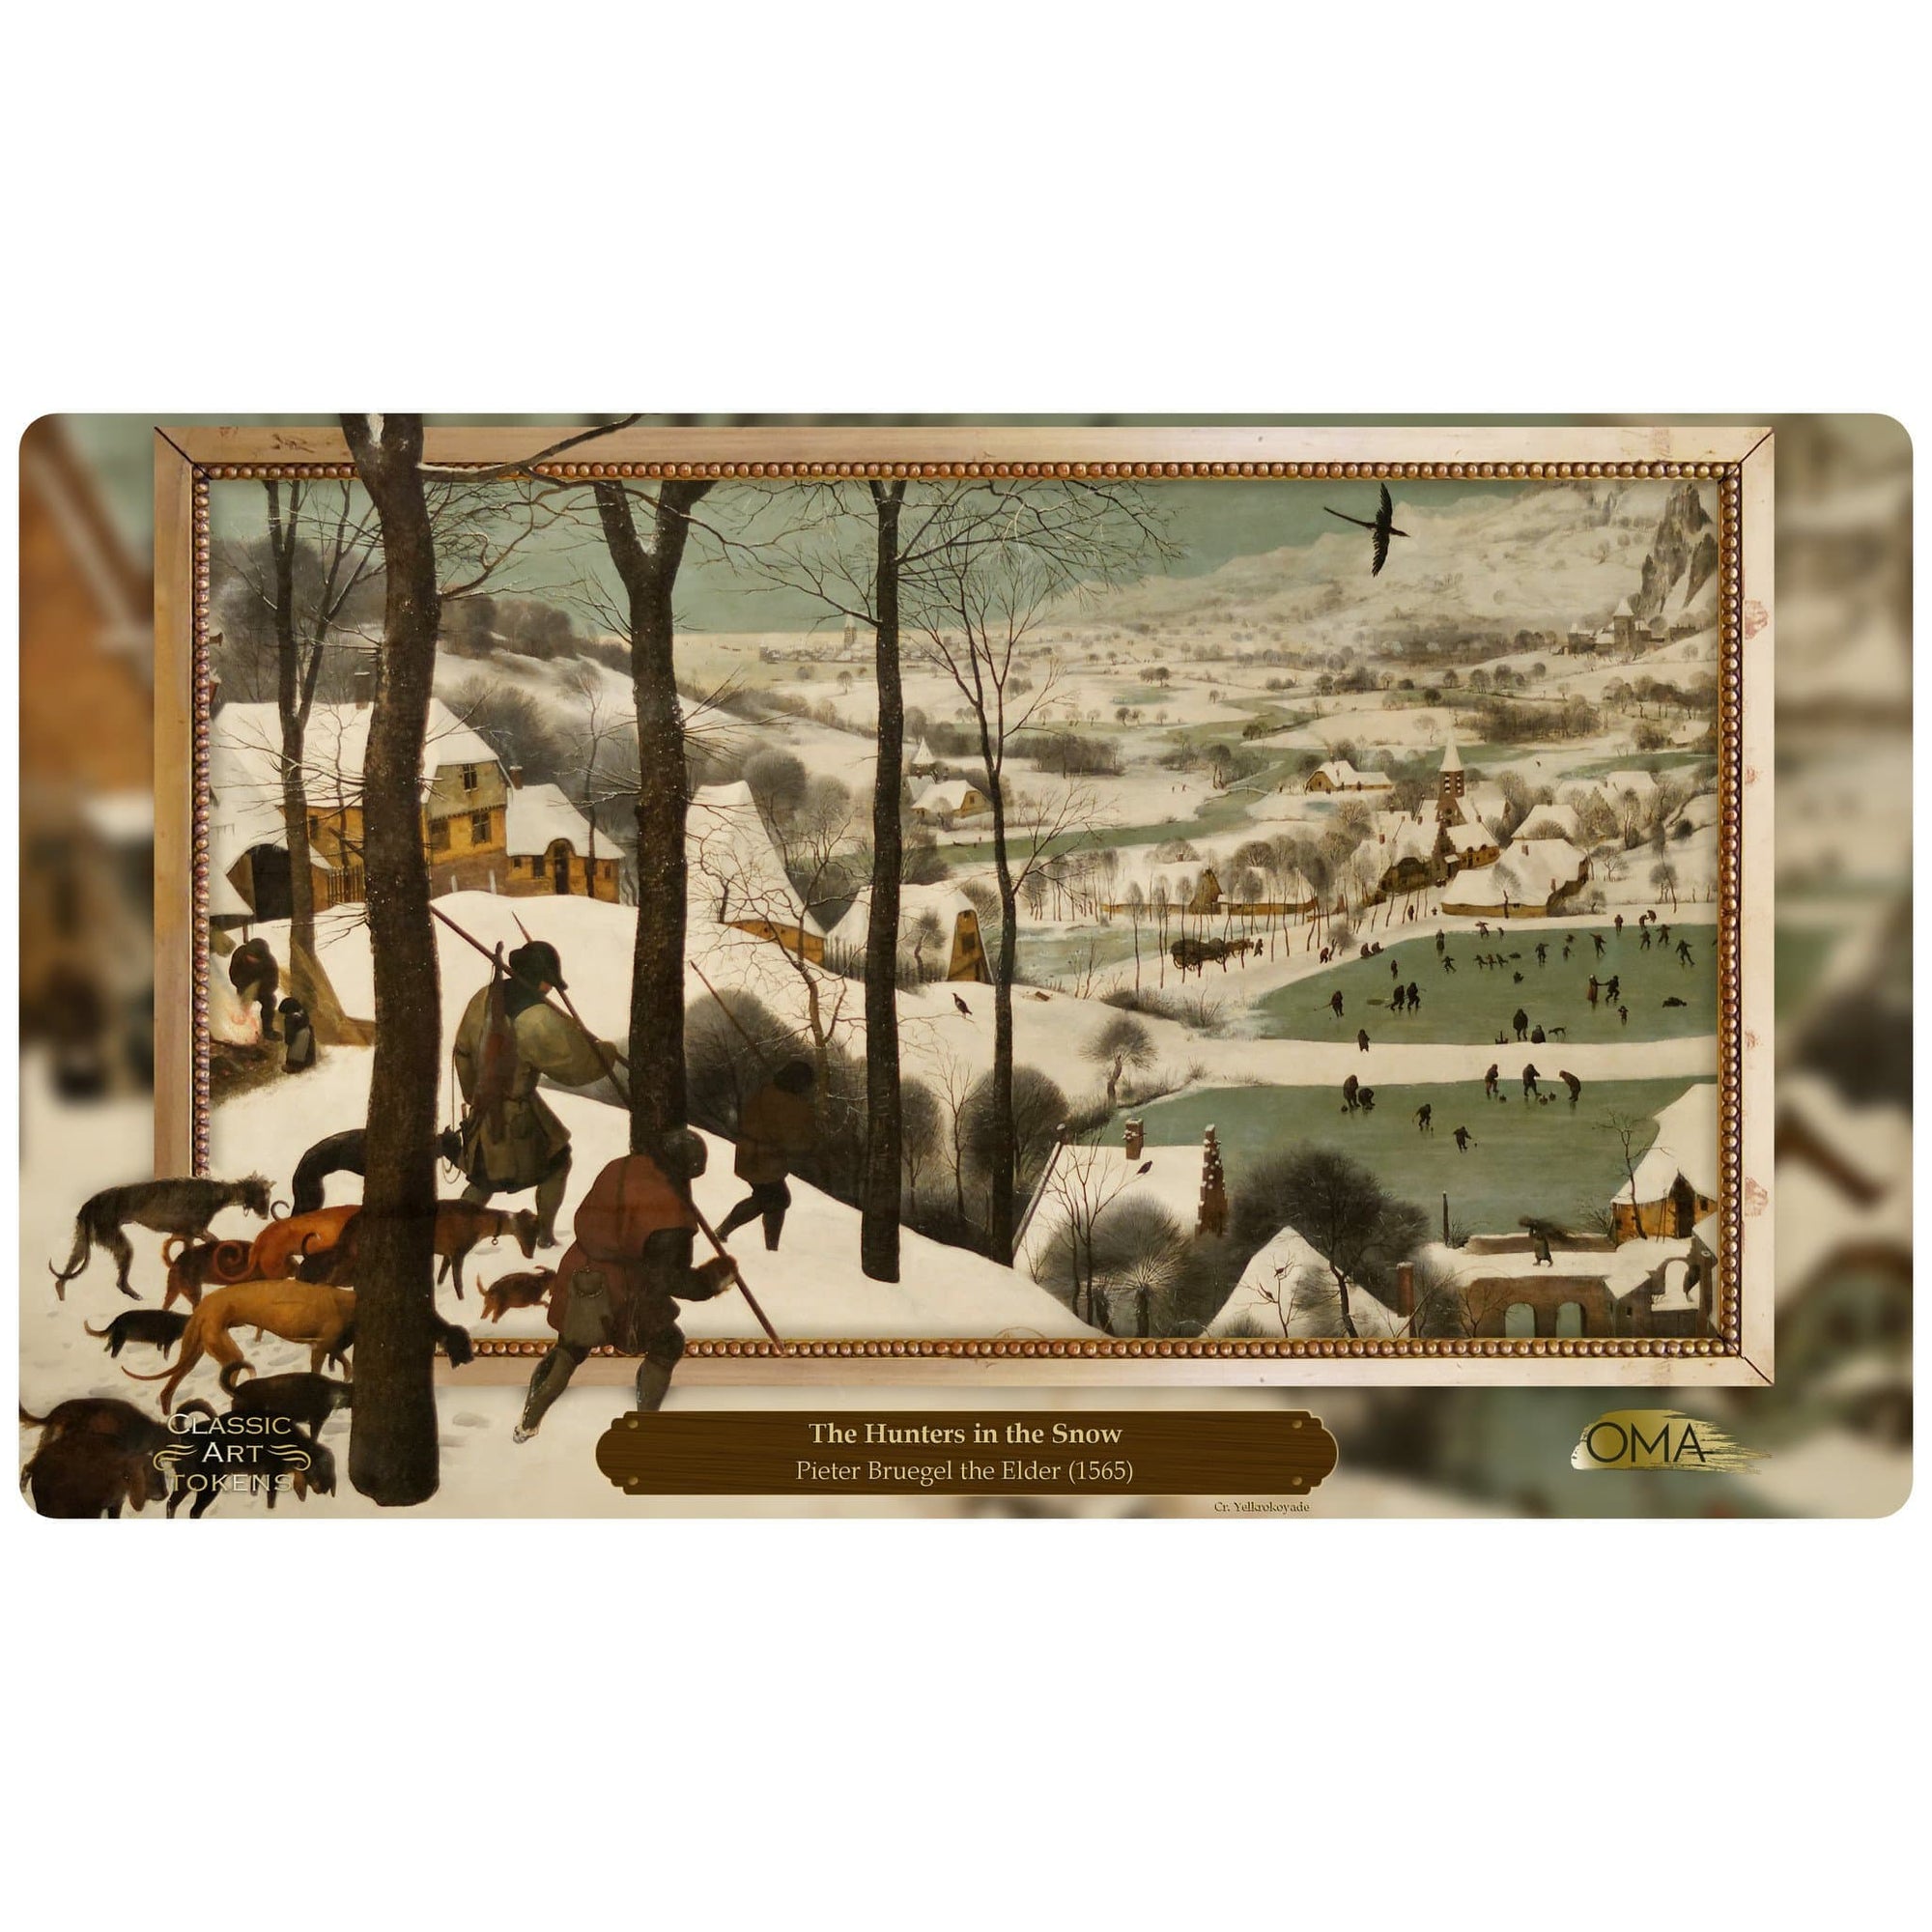 Ice Playmat by Pieter Bruegel the Elder - Playmat - Original Magic Art - Accessories for Magic the Gathering and other card games